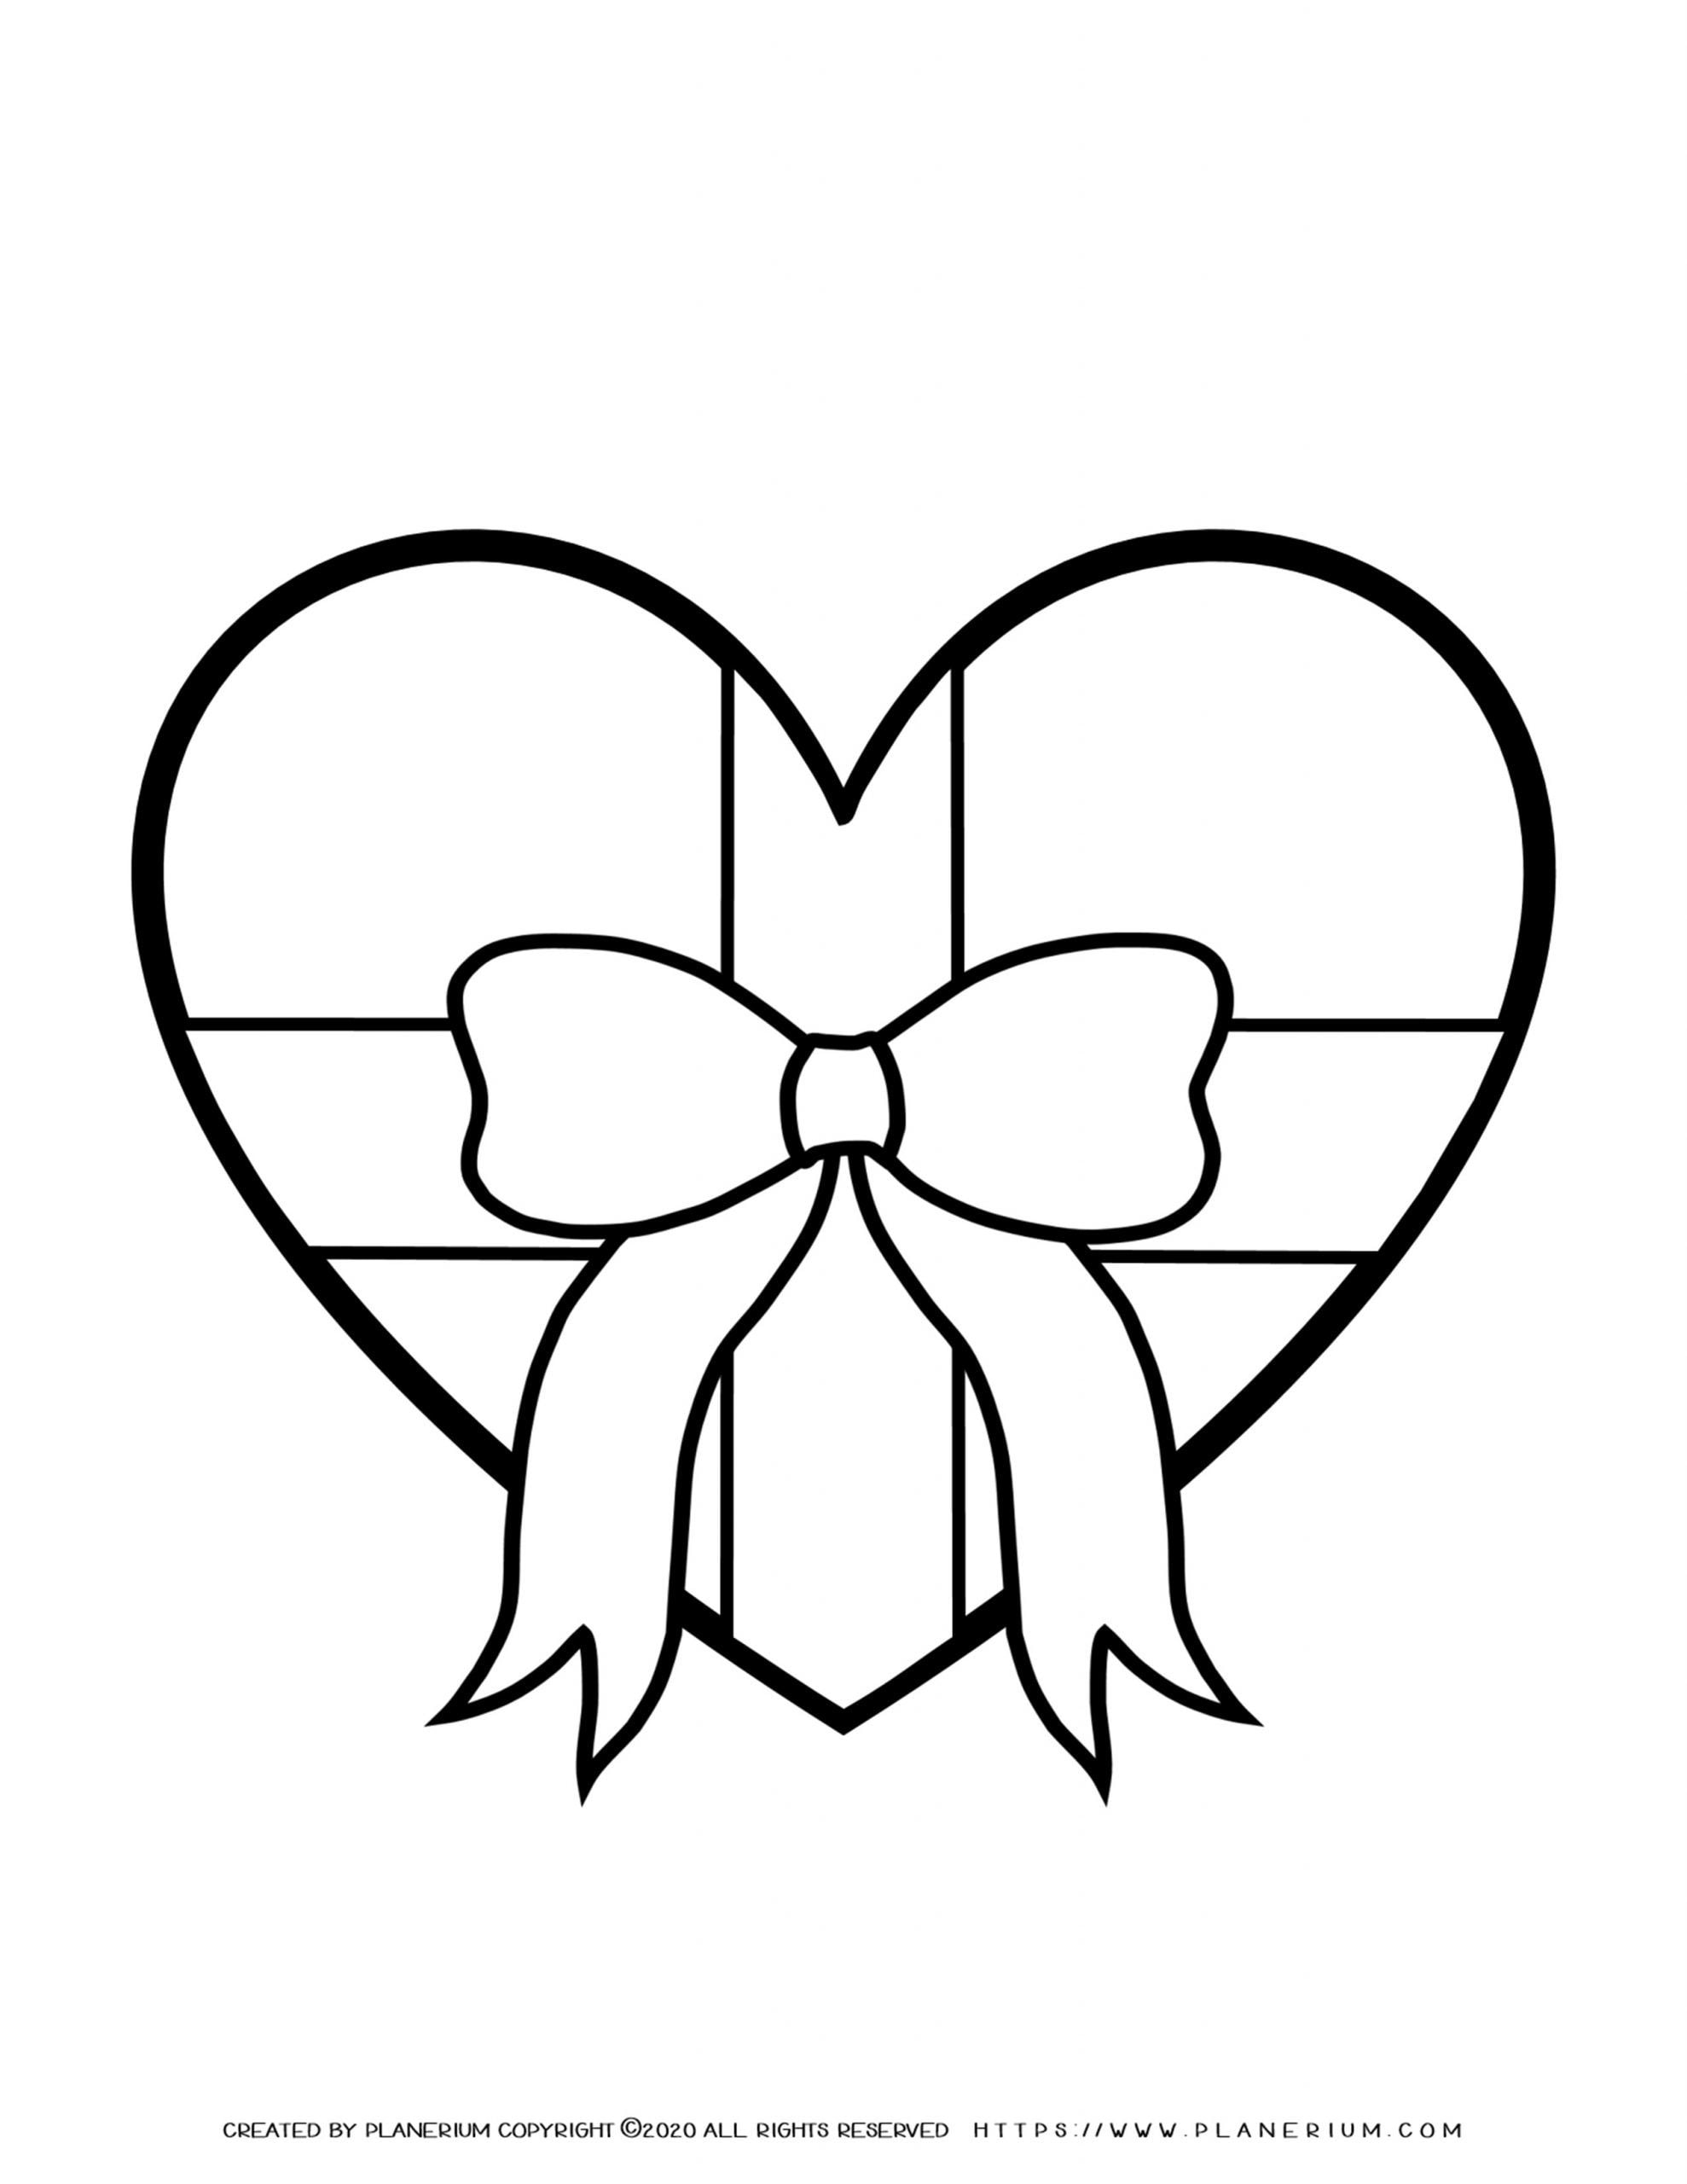 Mother's day - Coloring Page - Heart Present